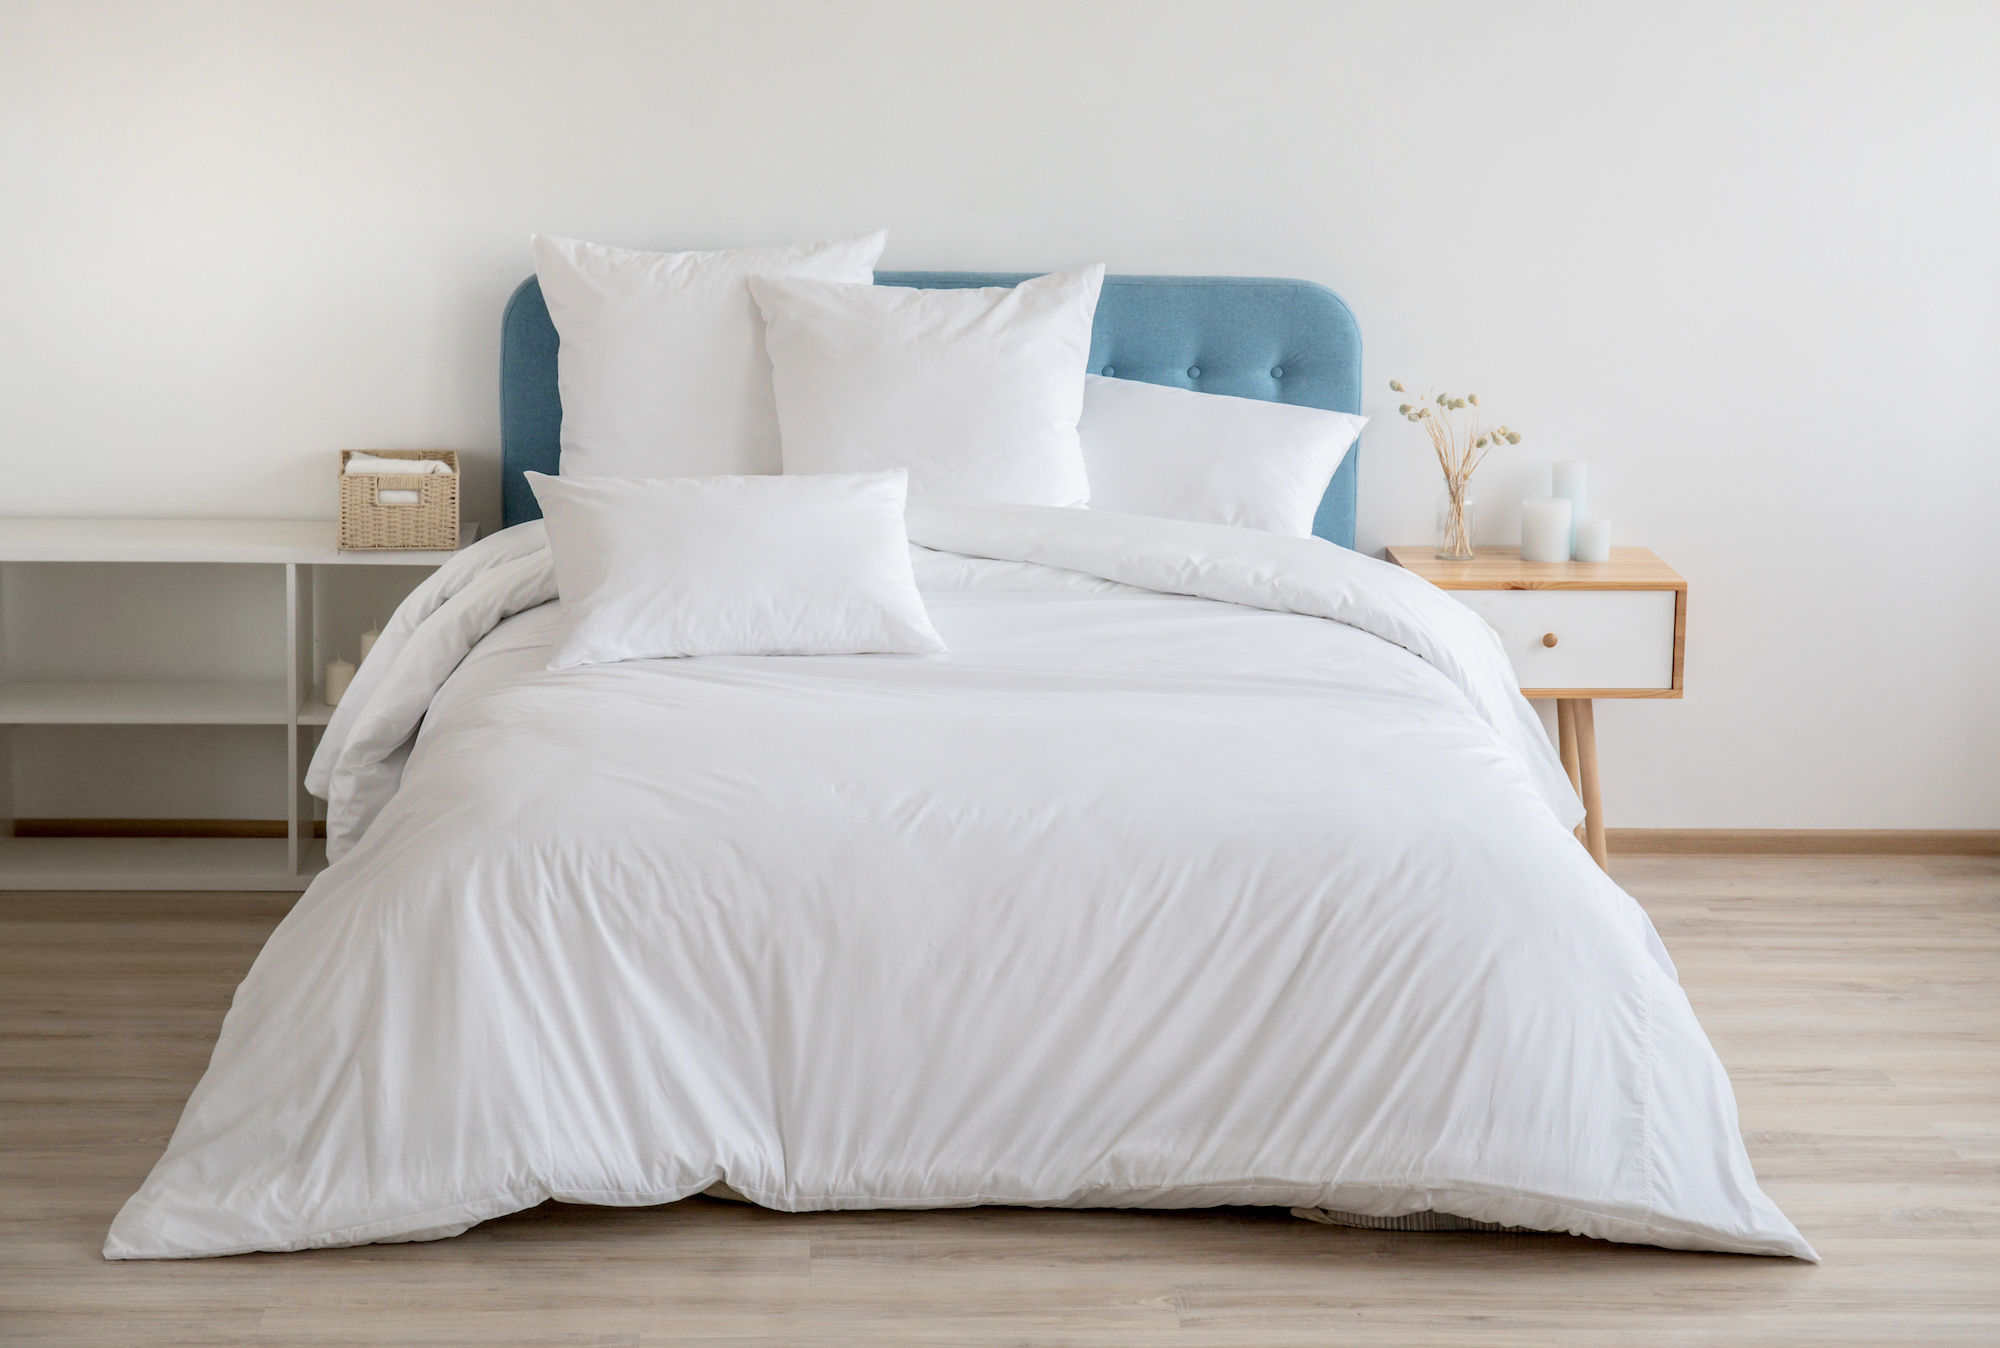 Bed with blue headboard and white duvet cover with matching pillows.